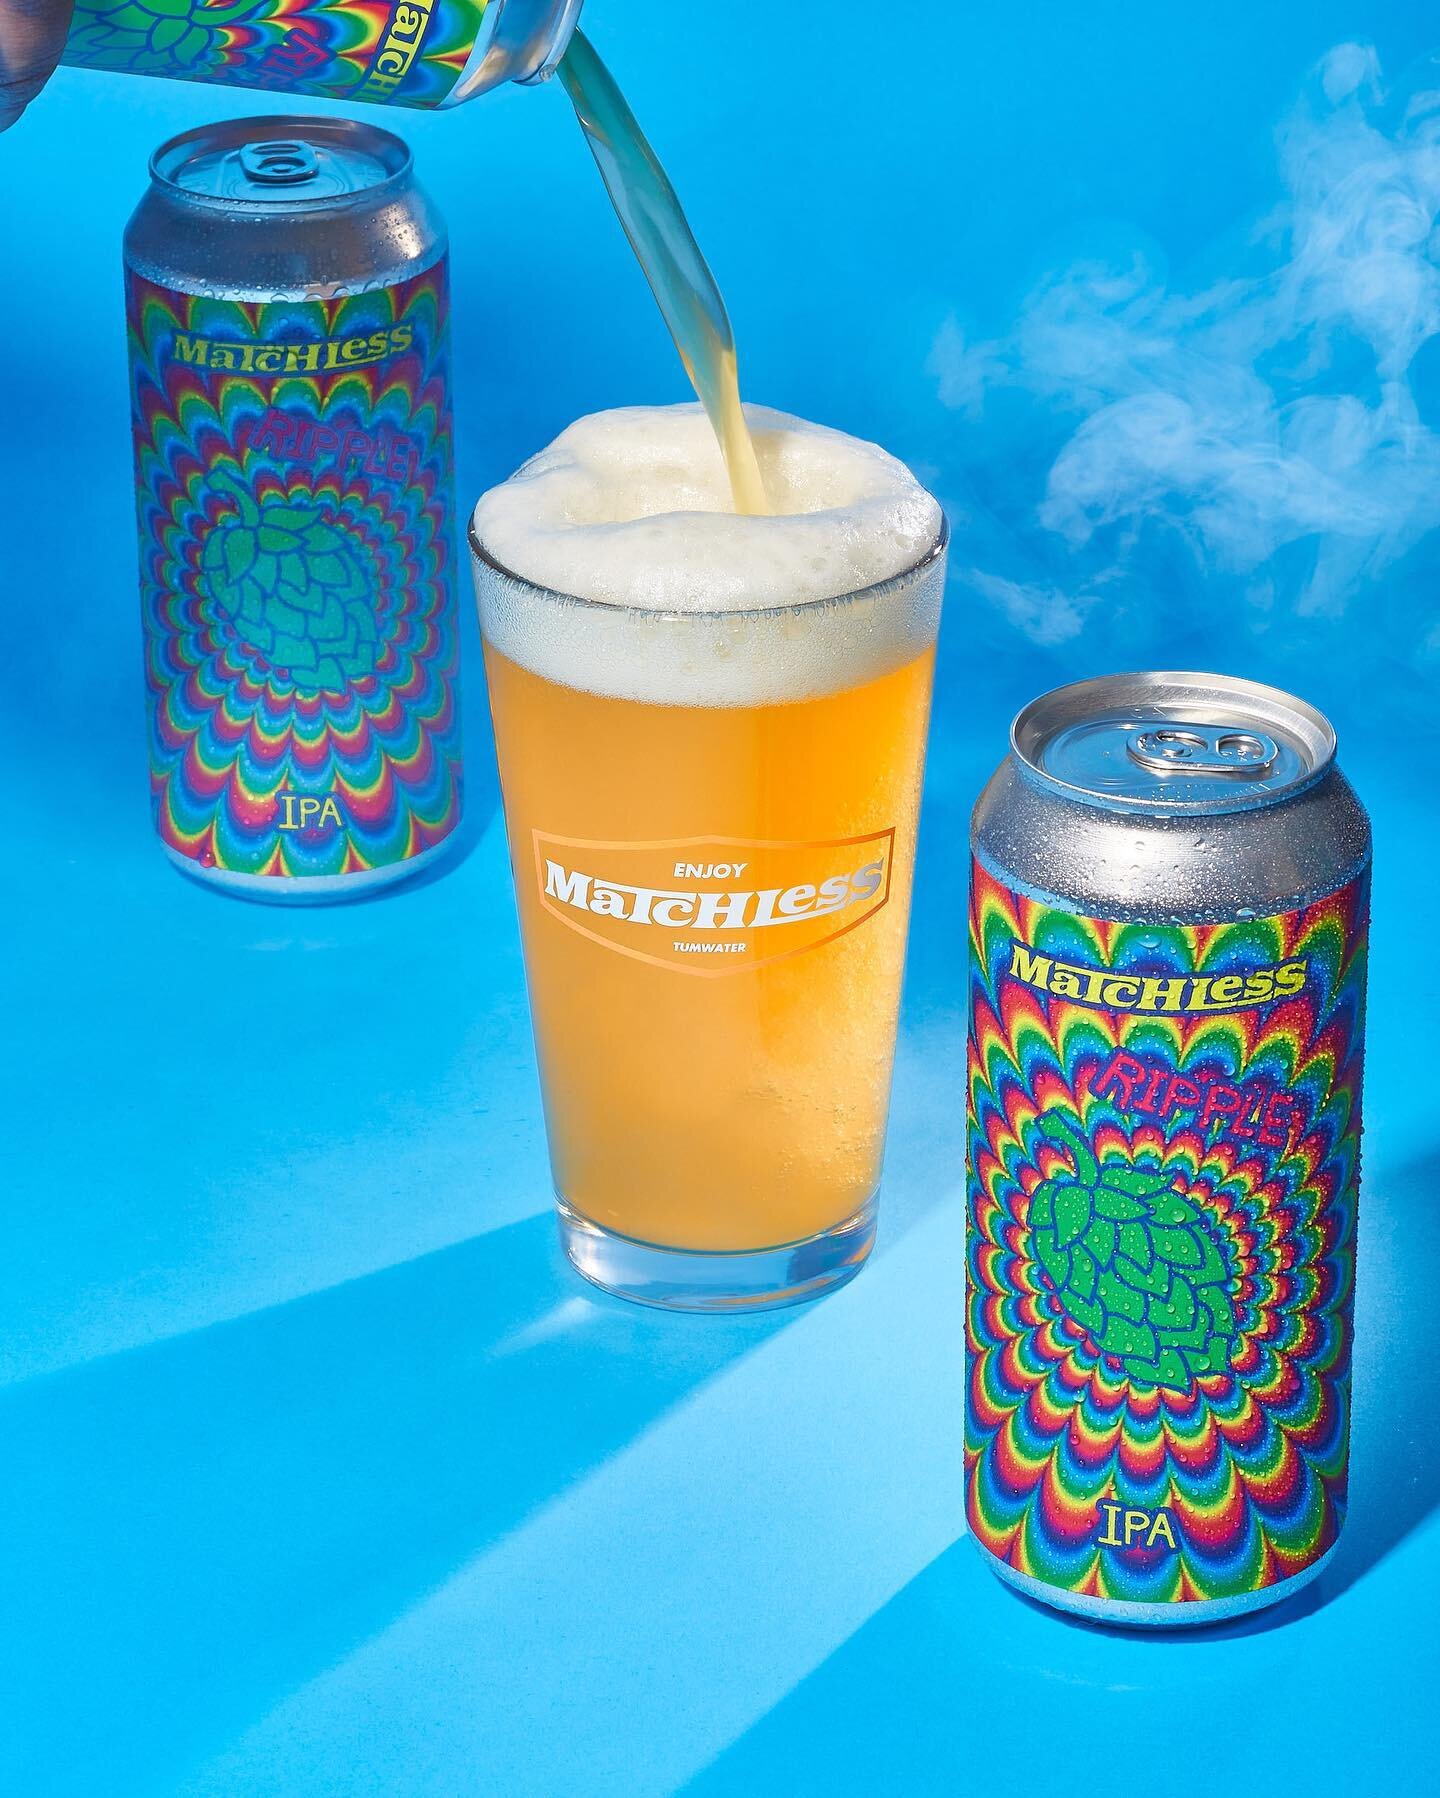 🌹🧸Ripple 💀🌞

Reach out your hand, if your beer can be empty. If your can is full, may it be again of this IPA made gratefully with Pilsner malt, Malteurop Wheat Malt and Malteurop Crystal Wheat. Let it be known there is Talus, Chinook &amp; Amari